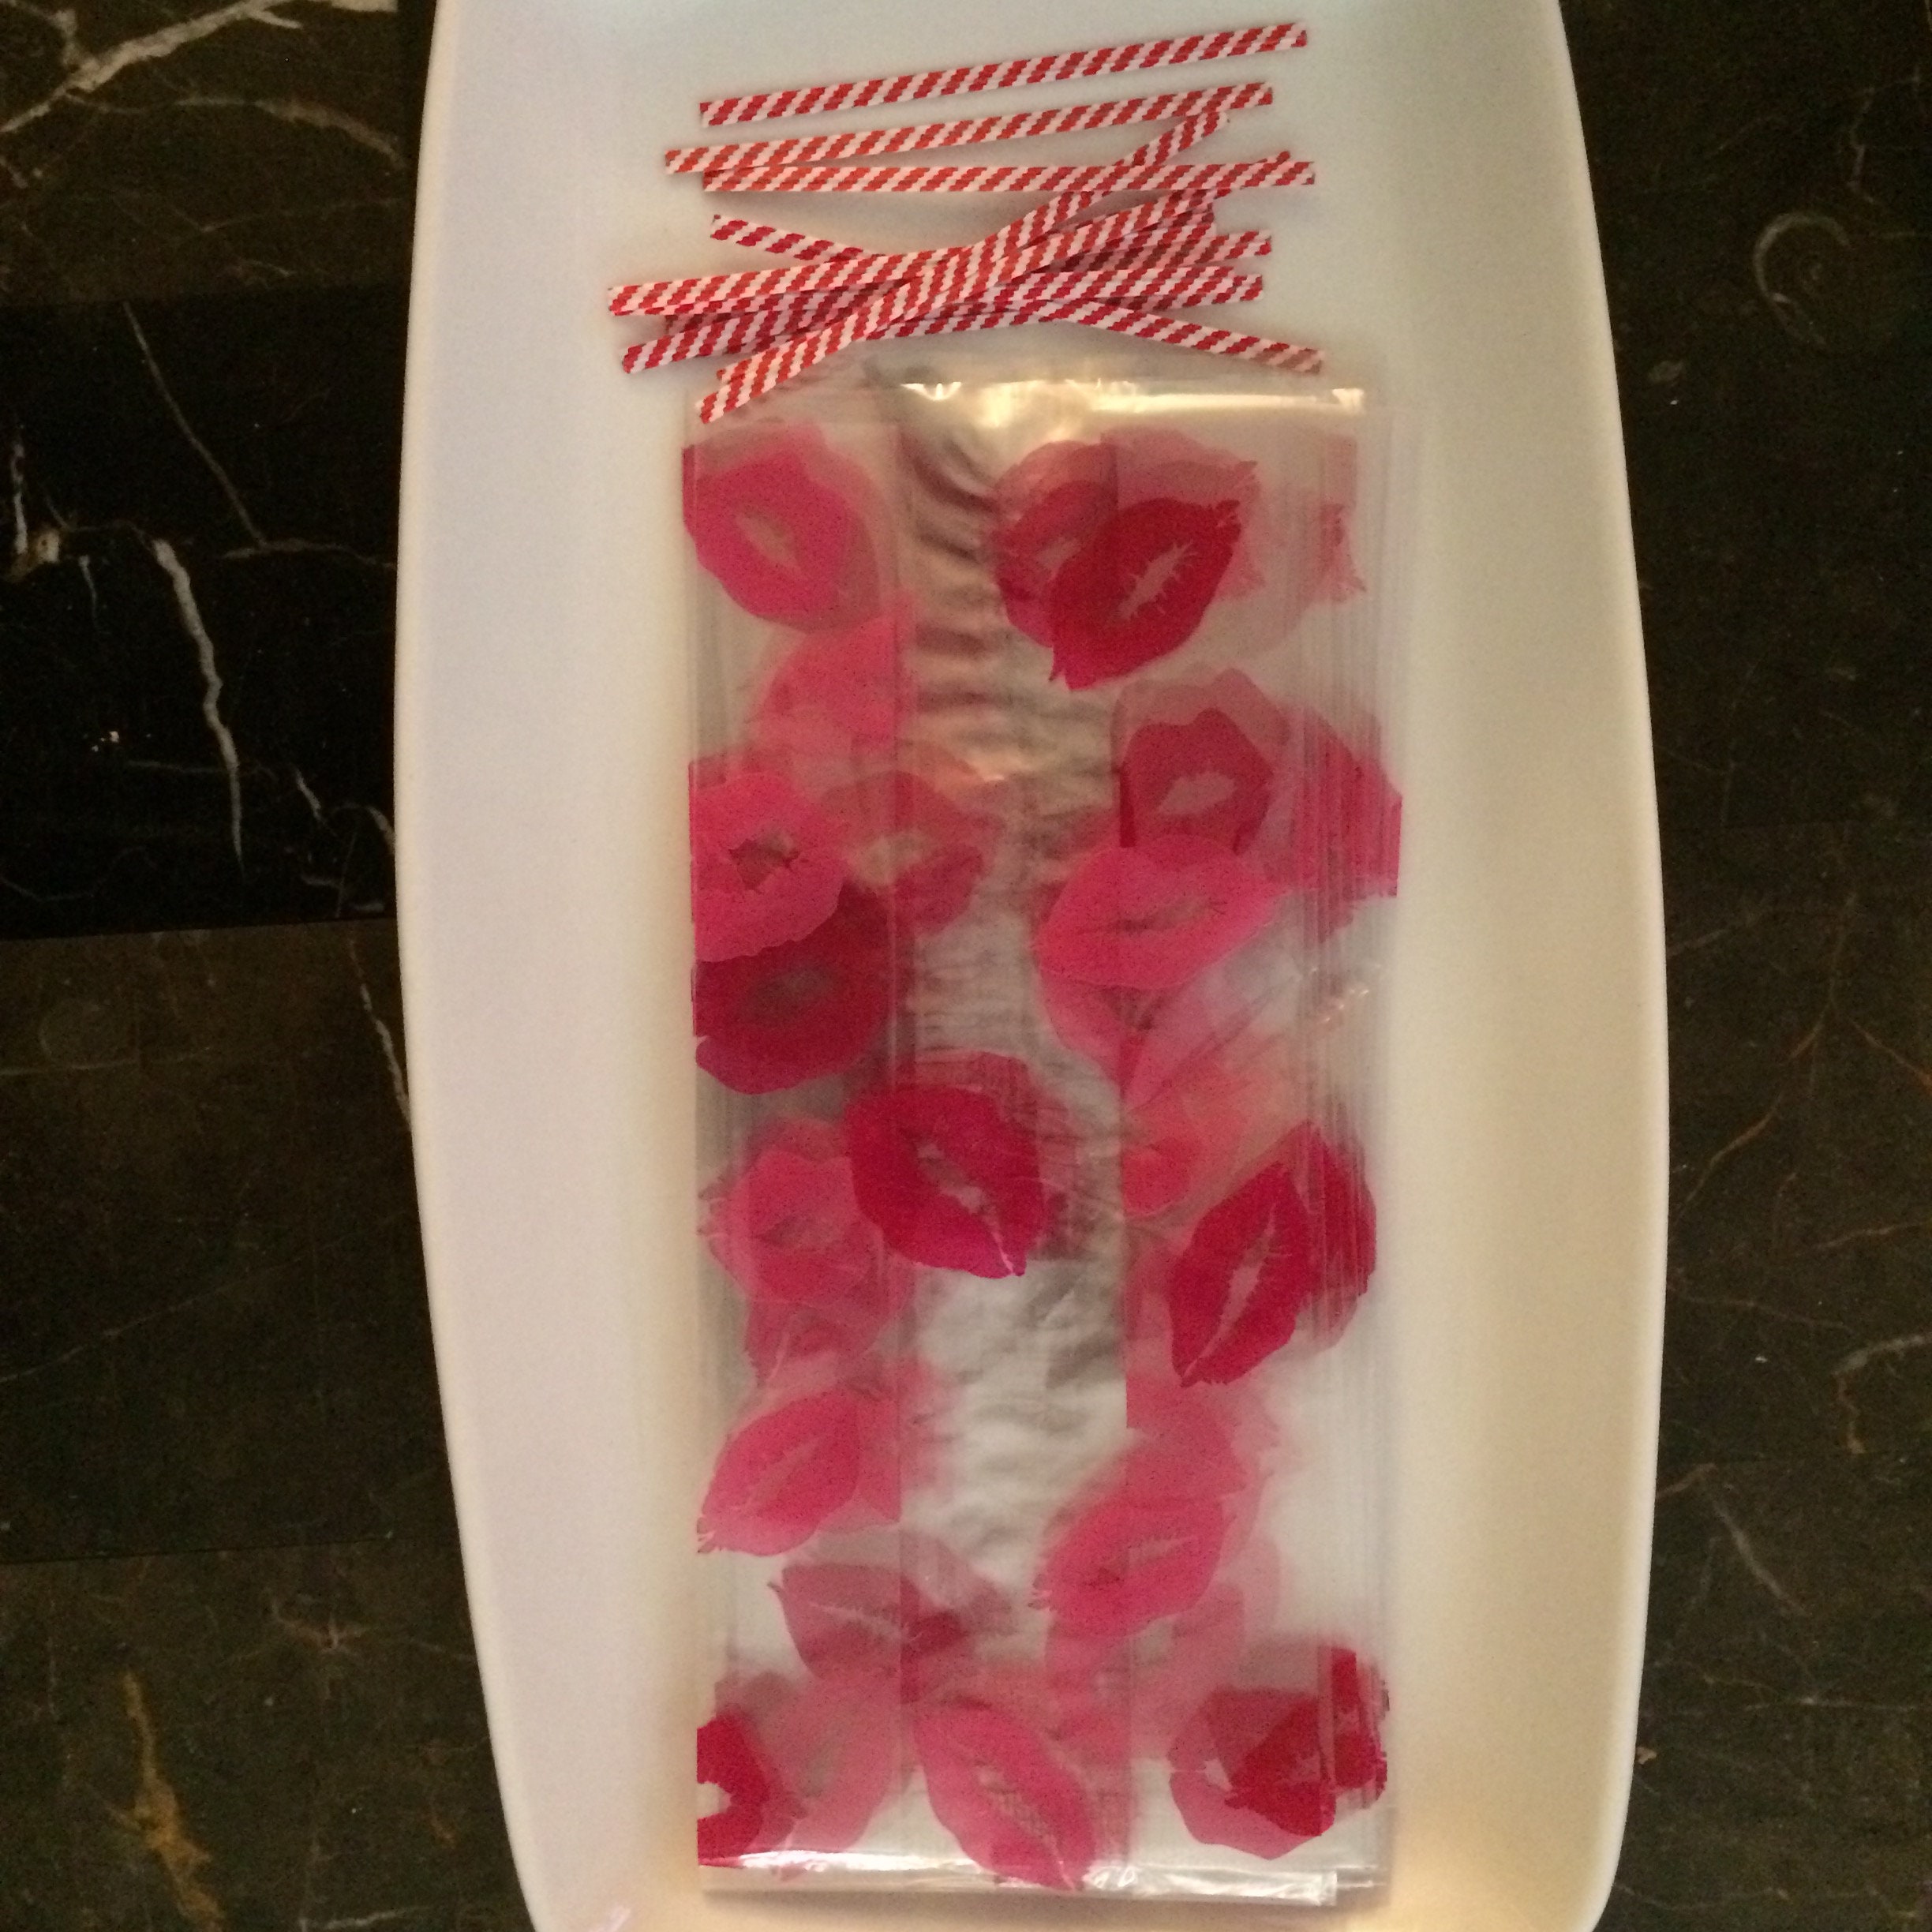 48 VALENTINE'S DAY Party bag CELLO Cellophane Goody Treat HEART PRINT candy BAGS 